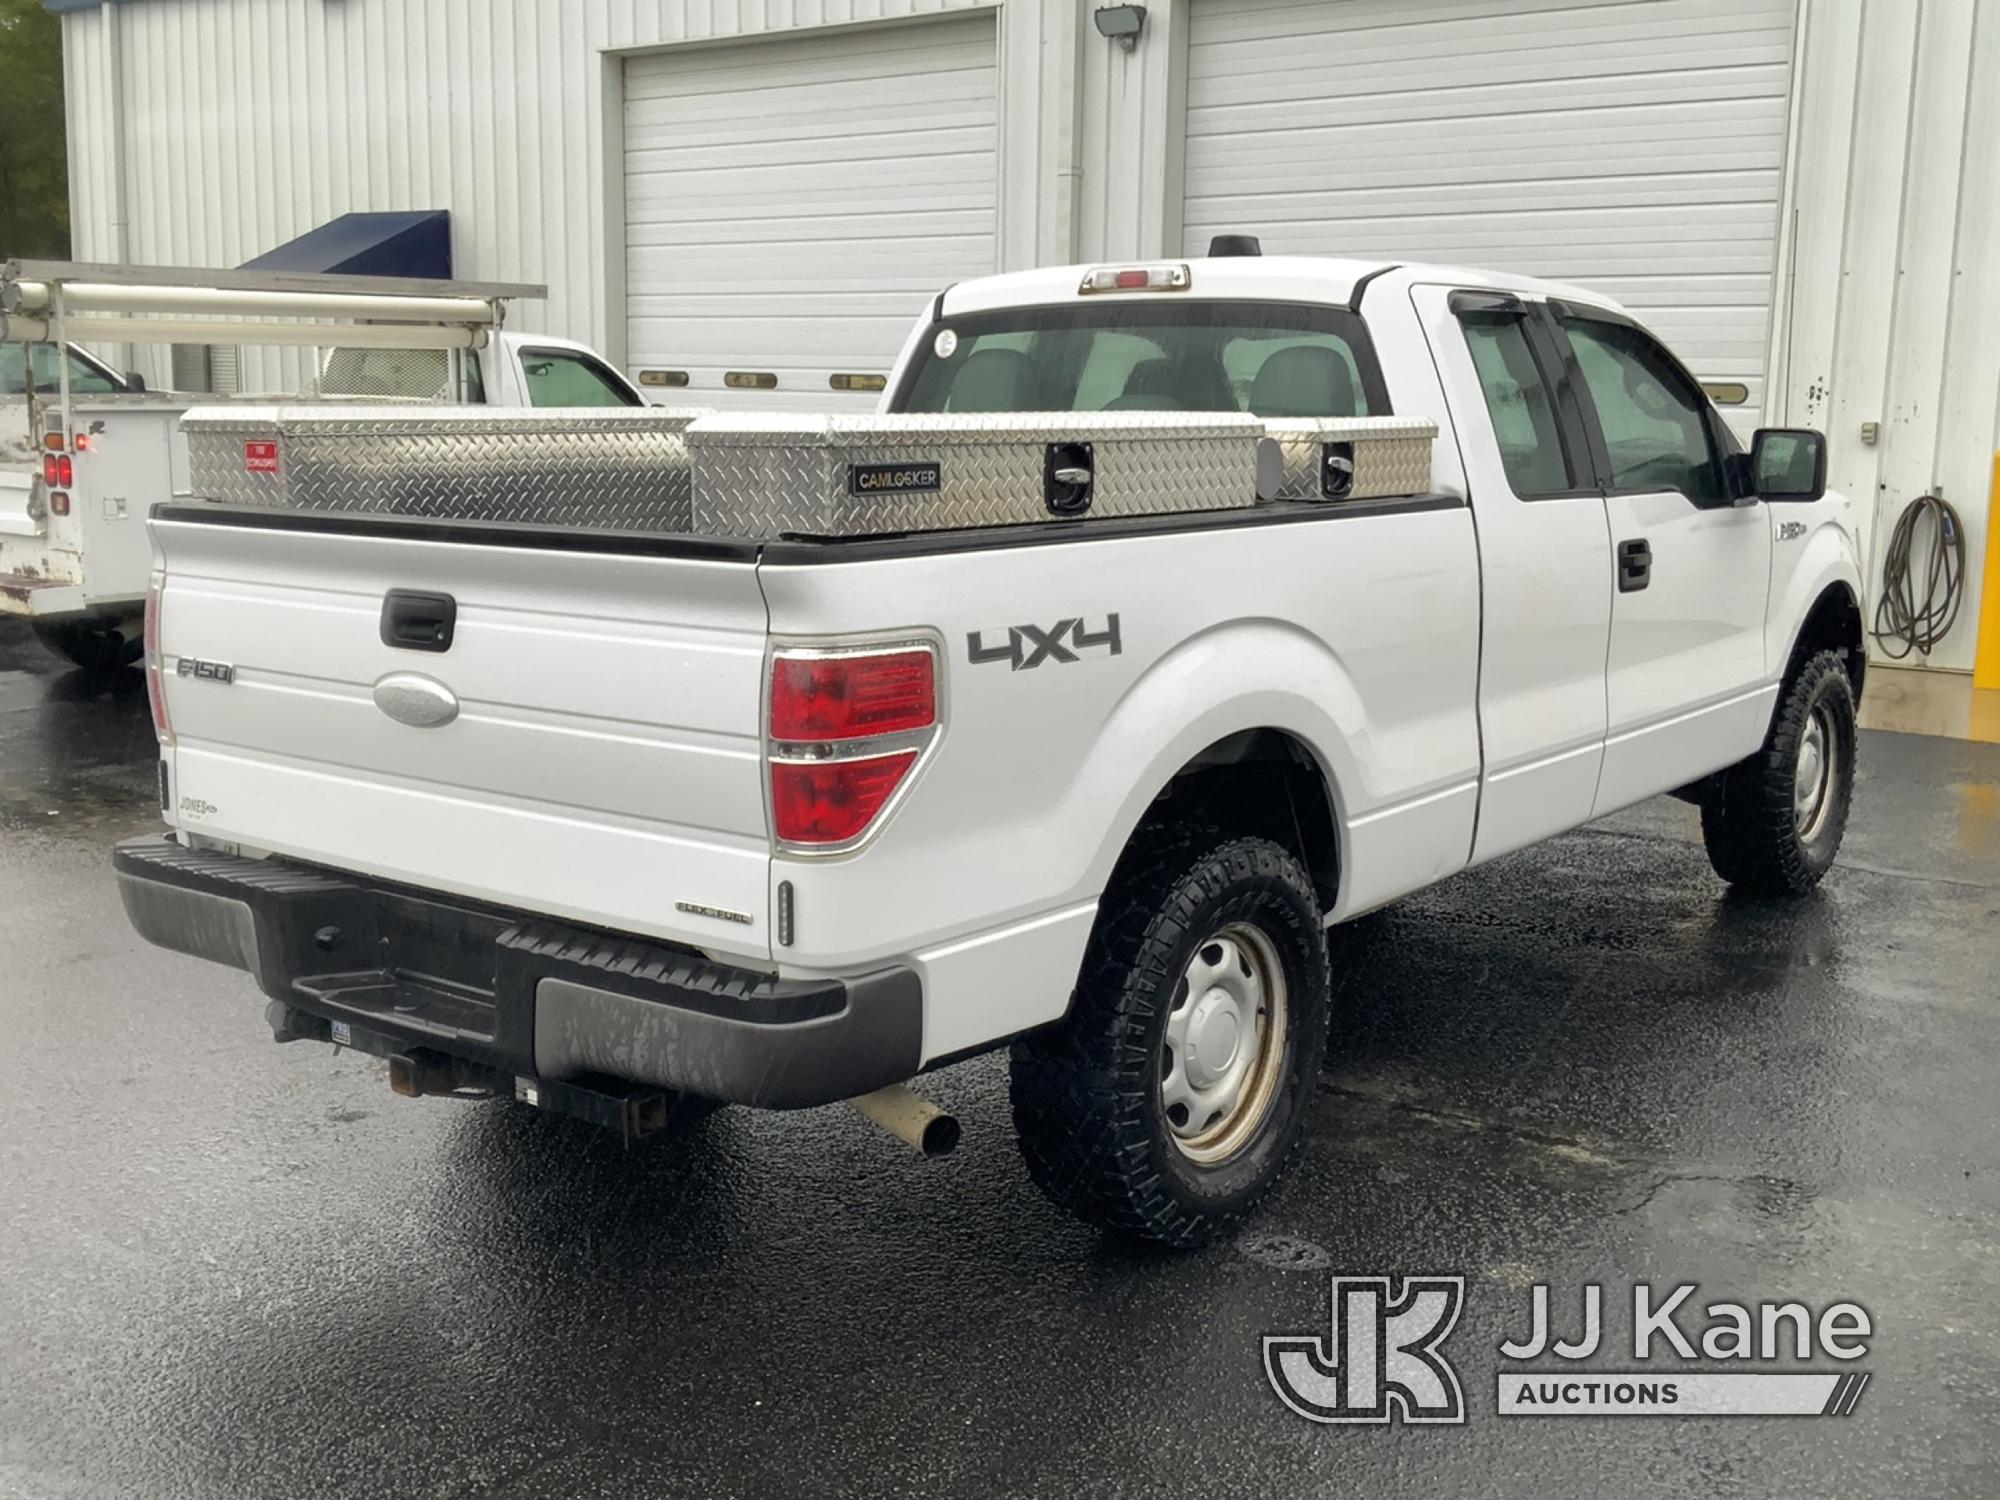 (Supply, NC) 2011 Ford F150 4x4 Extended-Cab Pickup Truck, Co-Op Unit Runs, Moves